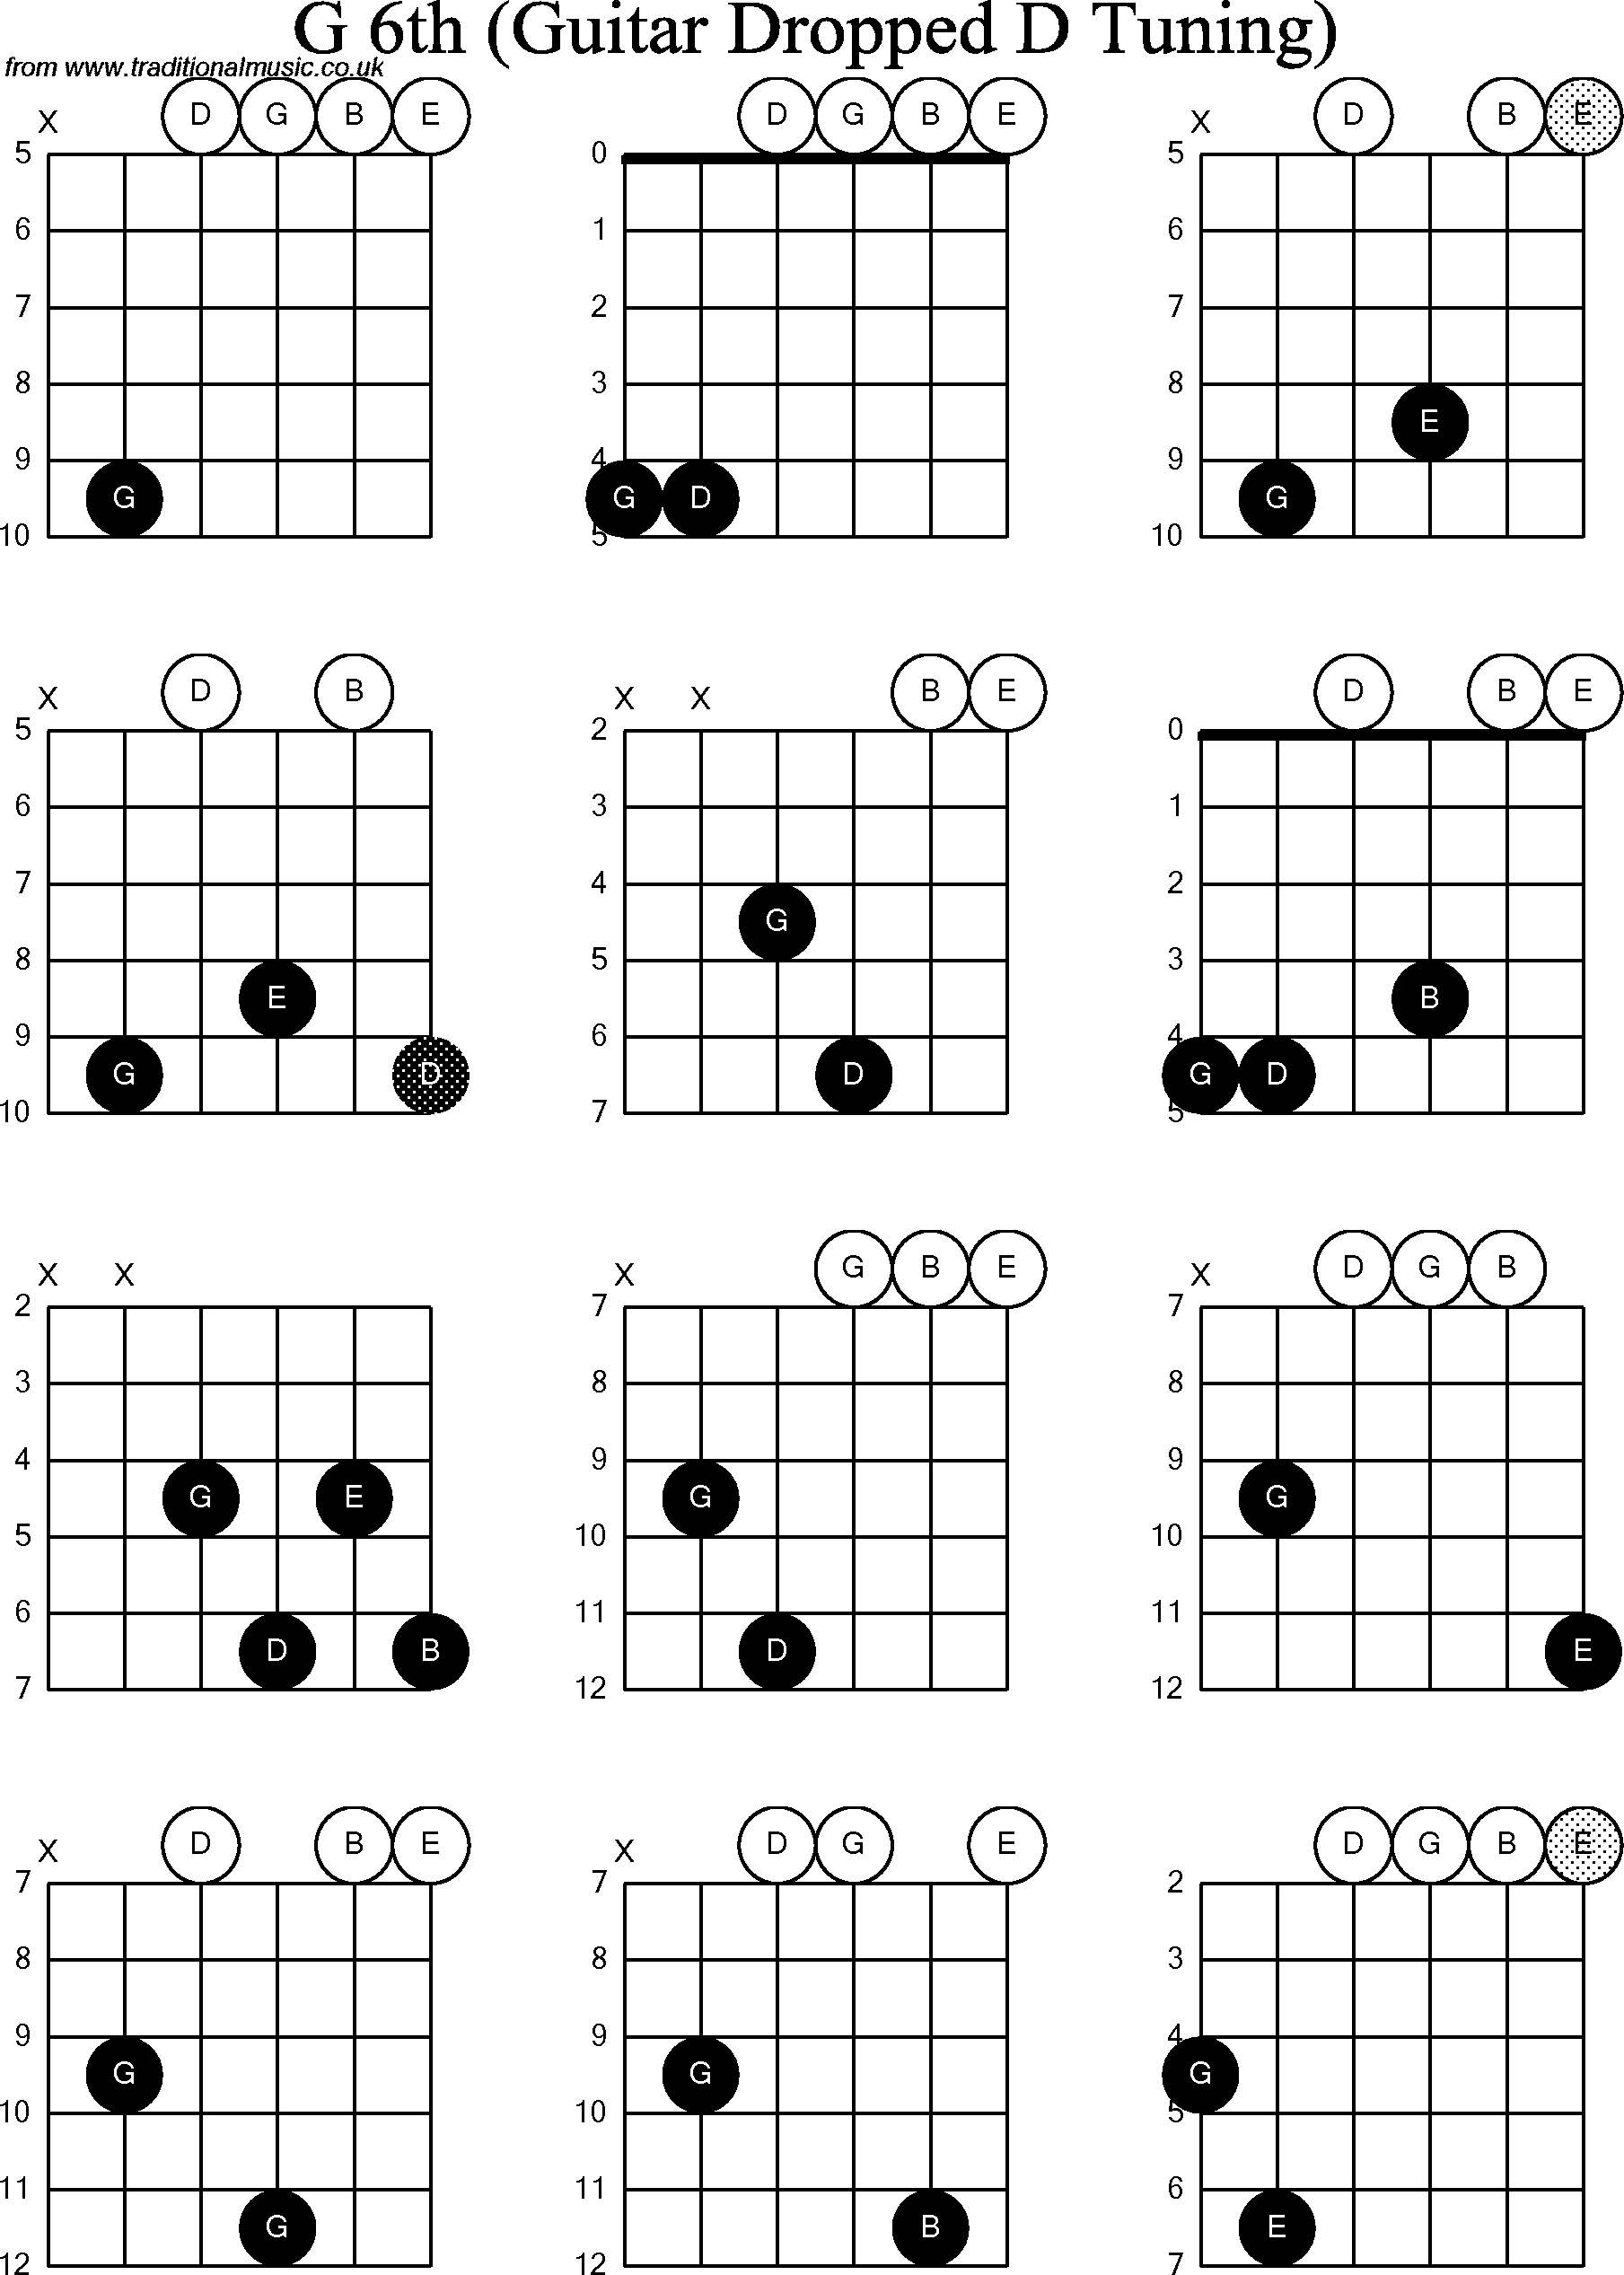 Chord diagrams for dropped D Guitar(DADGBE), G6th